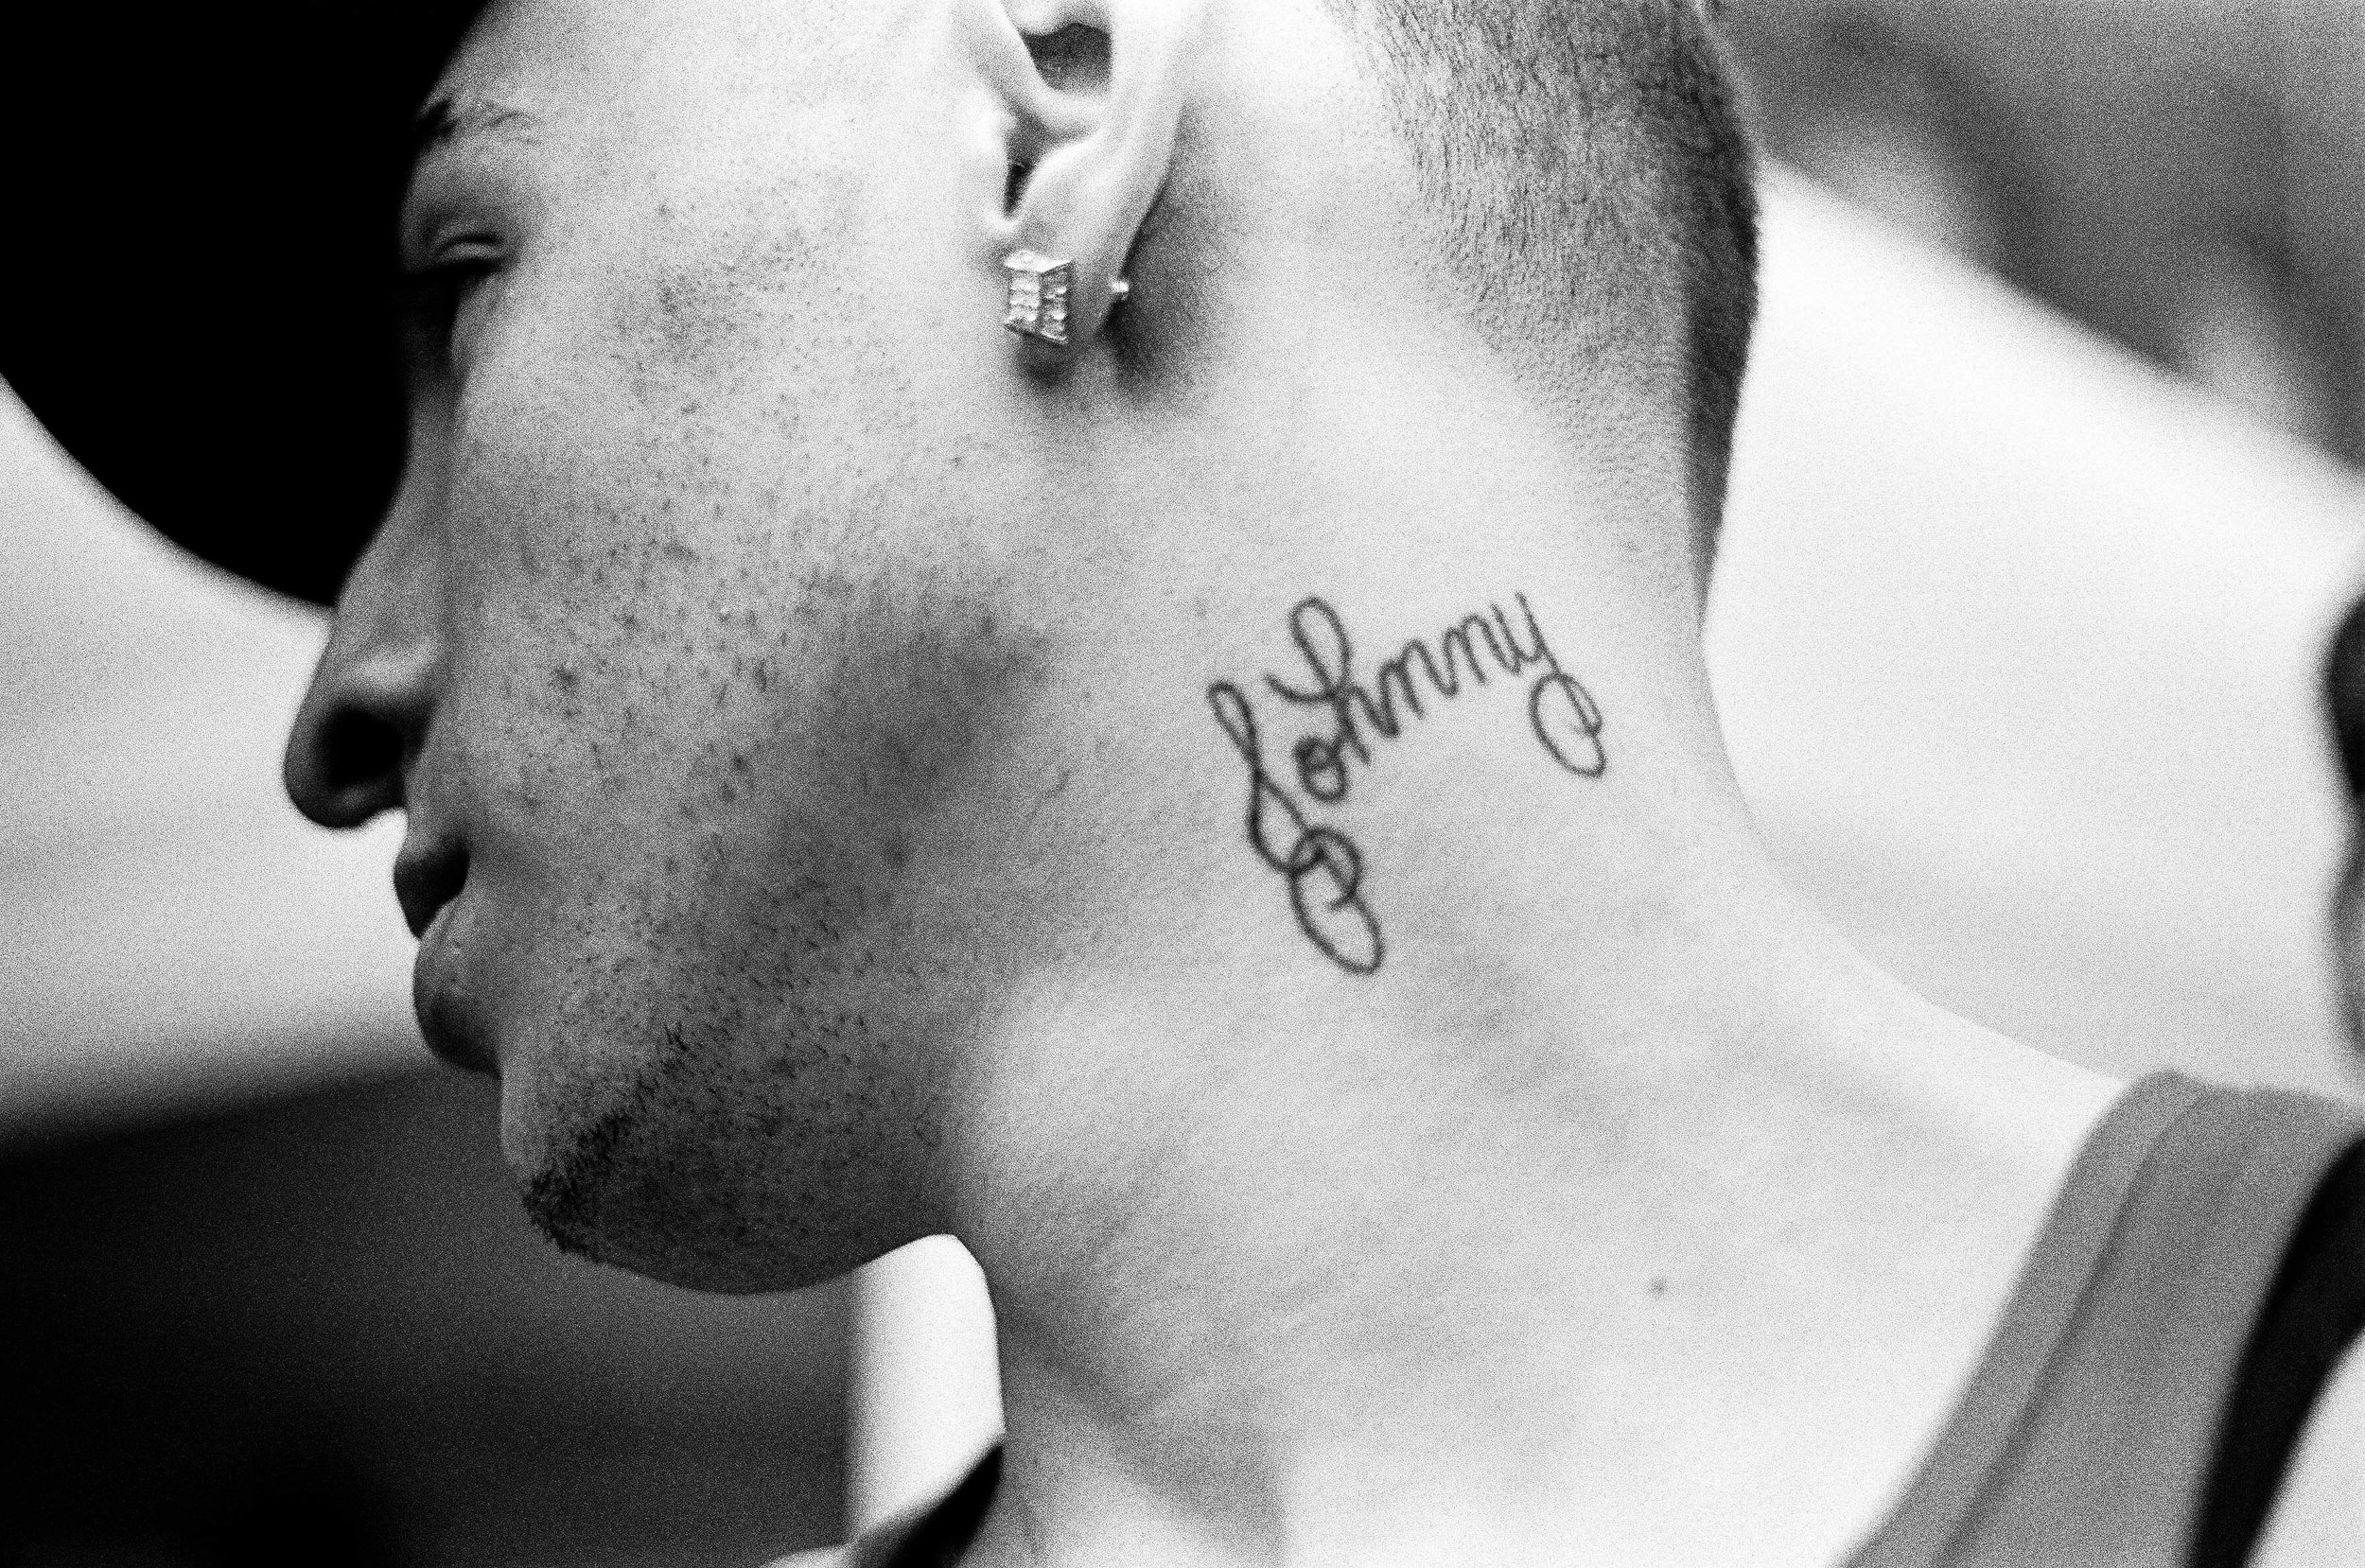   A young man shows off a neck tattoo that reads "Johnny"&nbsp;  